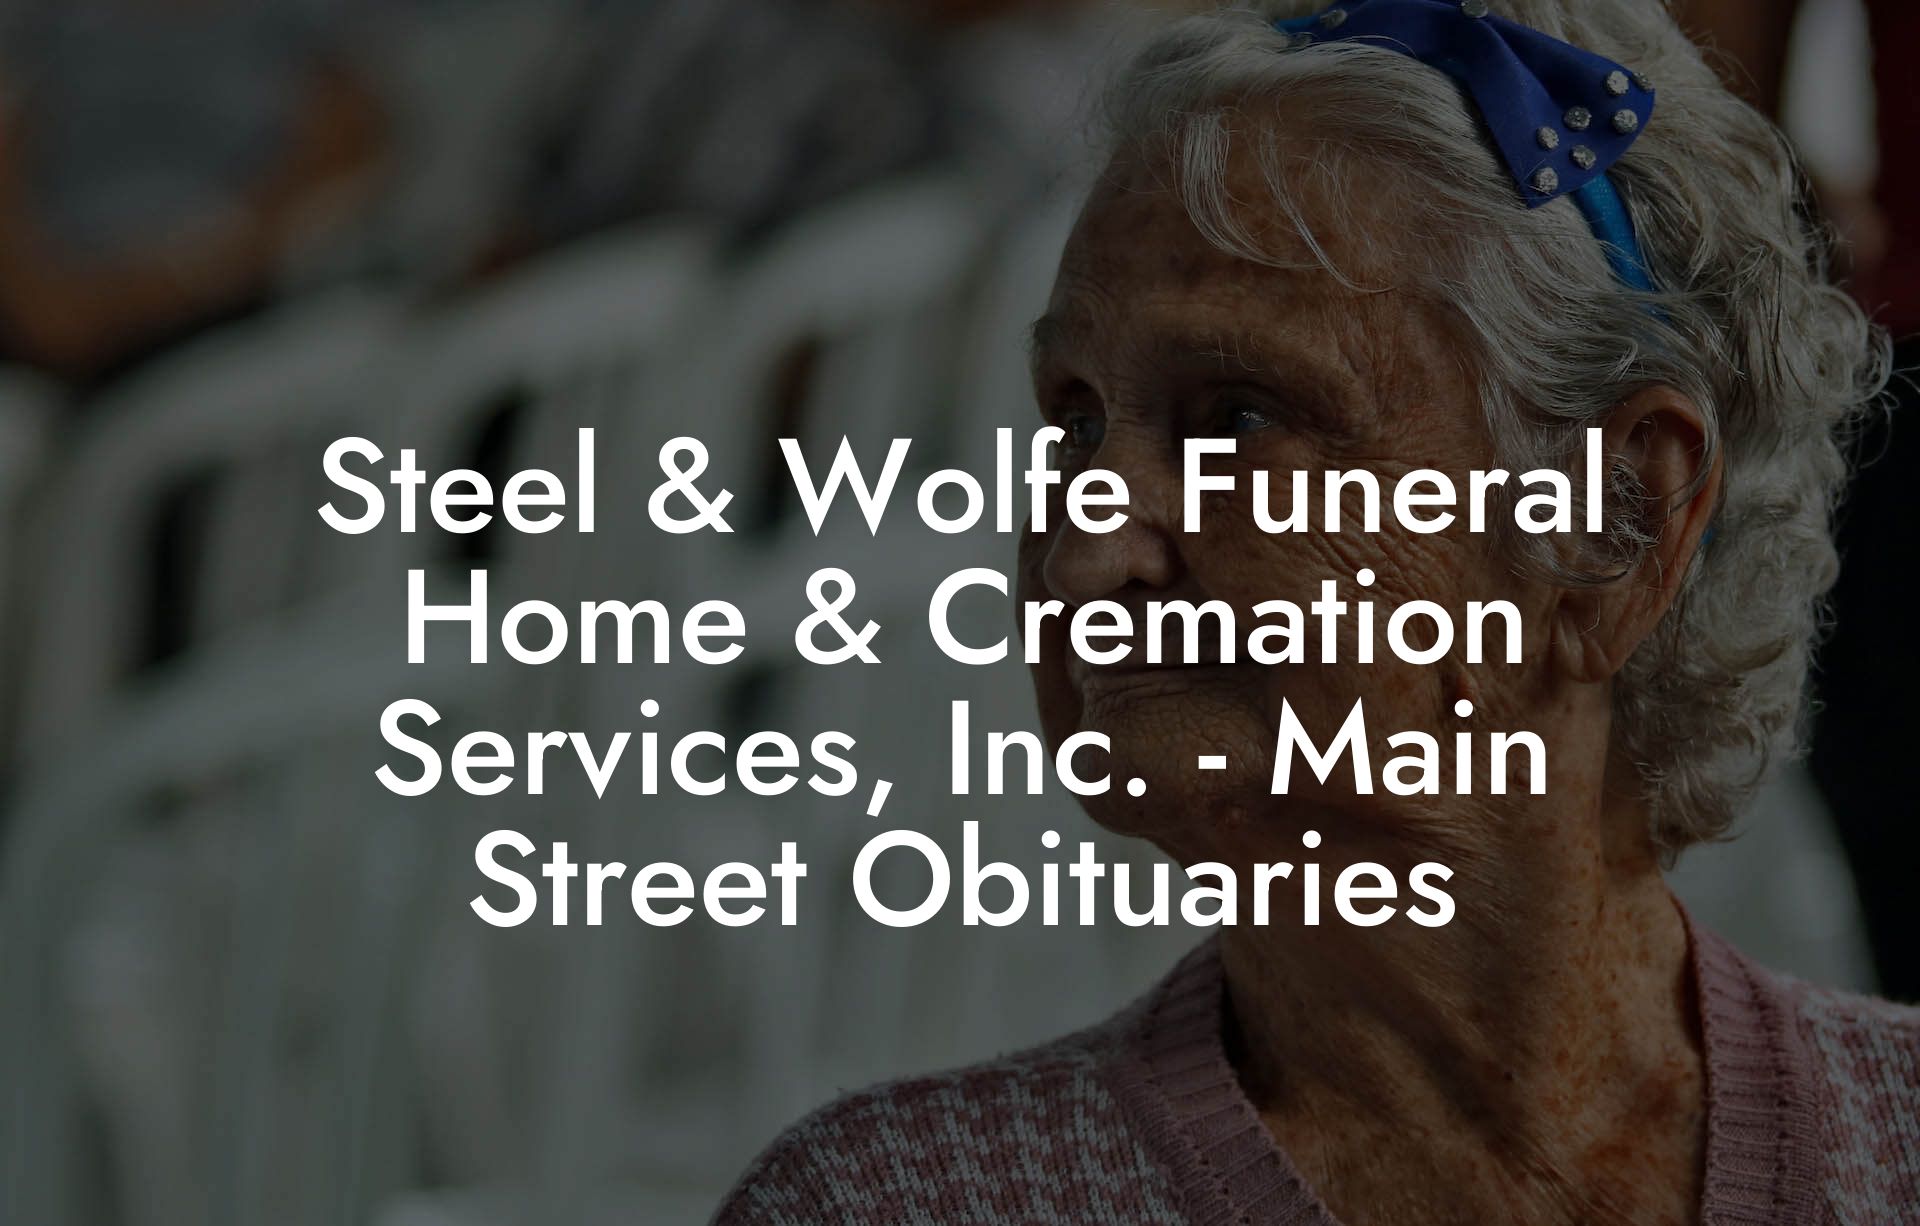 Steel & Wolfe Funeral Home & Cremation Services, Inc. - Main Street Obituaries